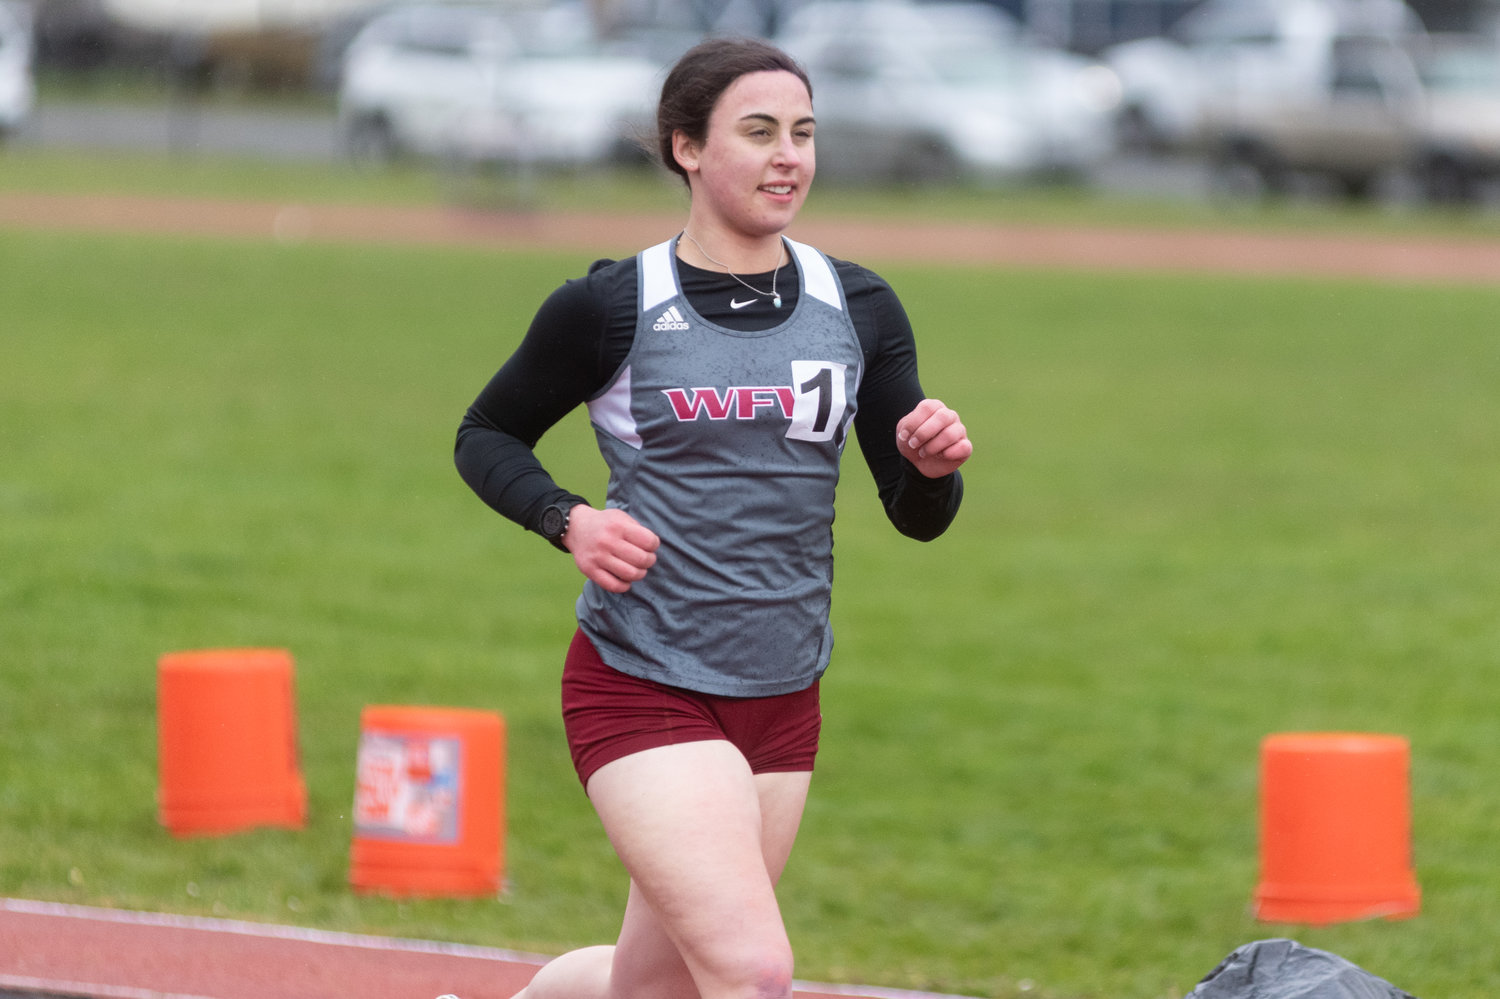 W.F. West's Elaina Koenig smiles while running the 1600m at W.F. West April 13.